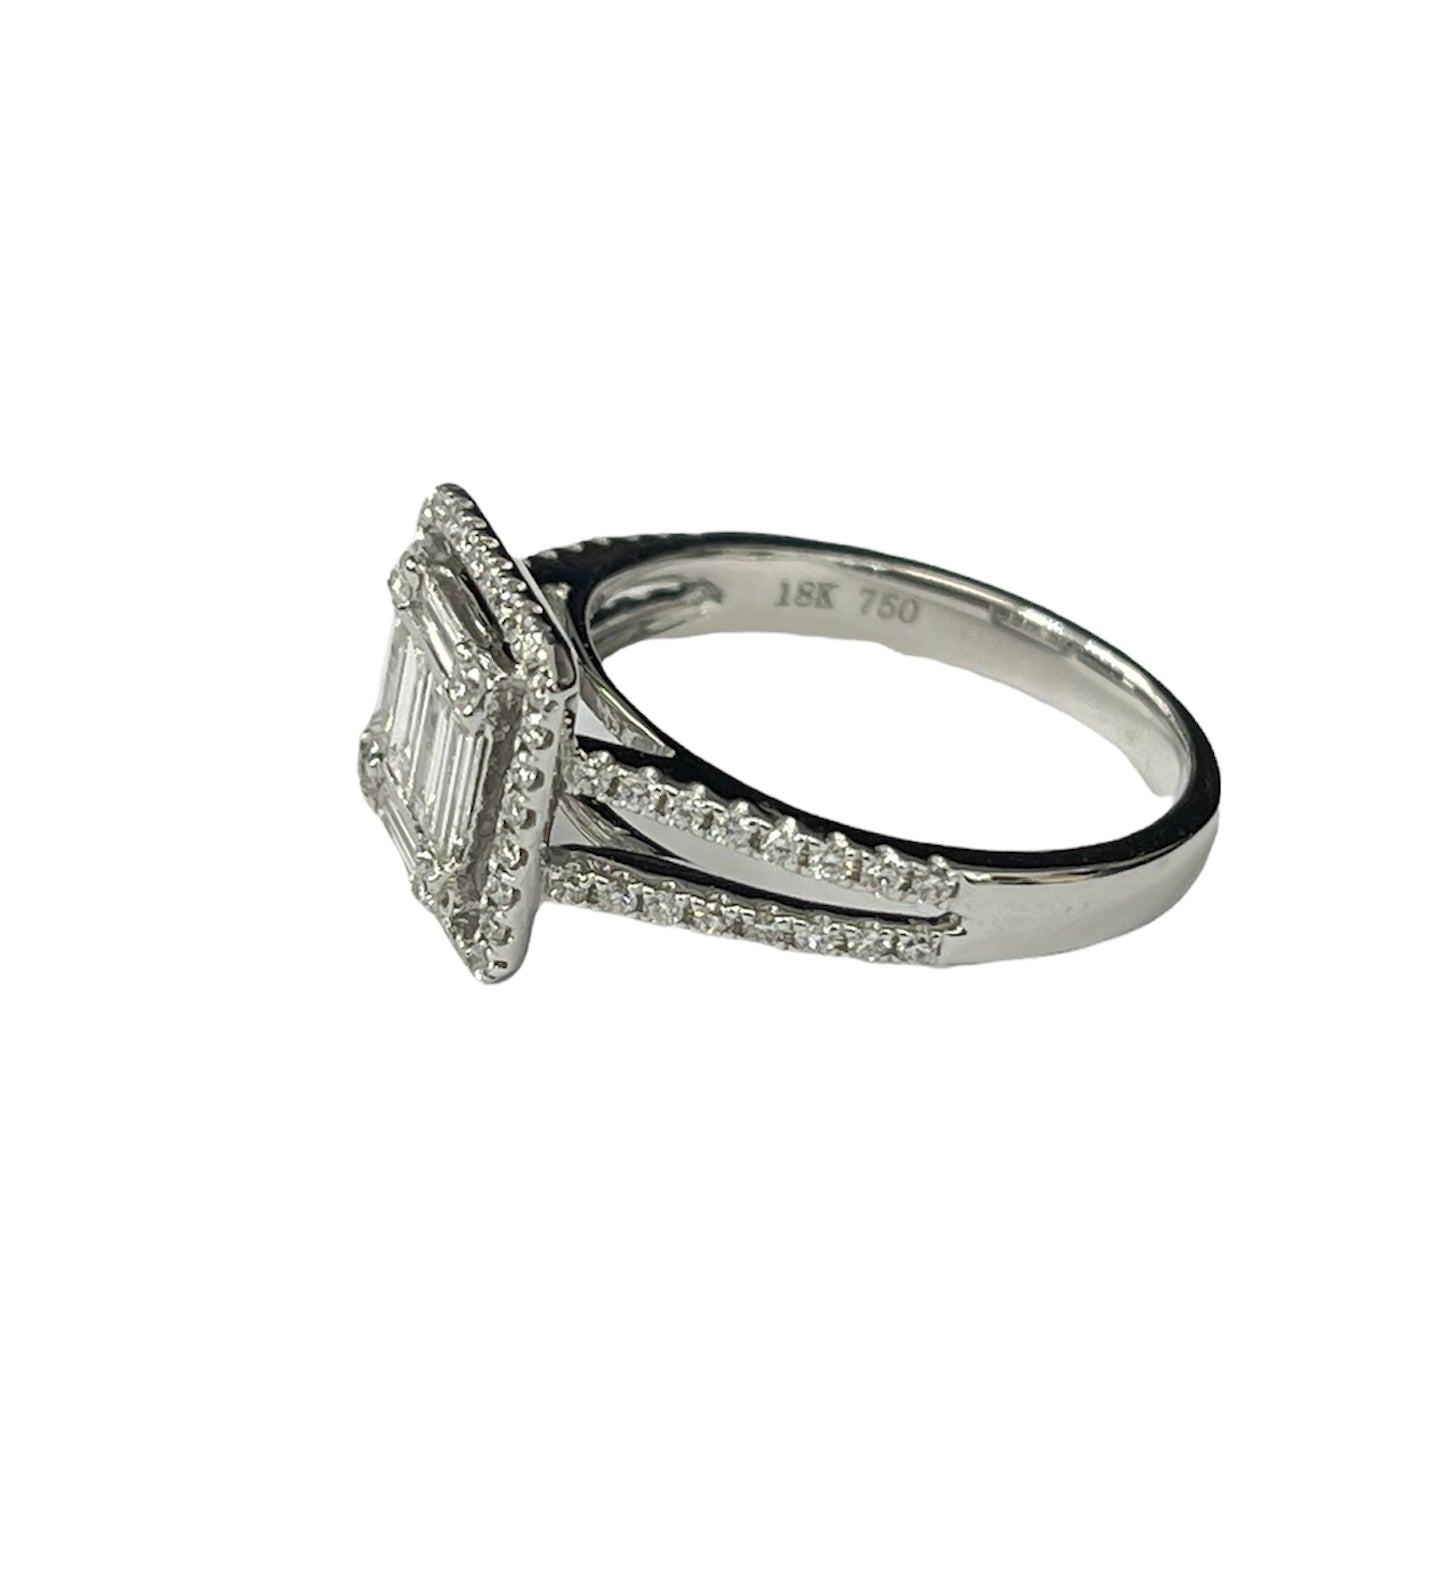 Baguettes Cluster Solitaire Diamond Ring White Gold 18kt